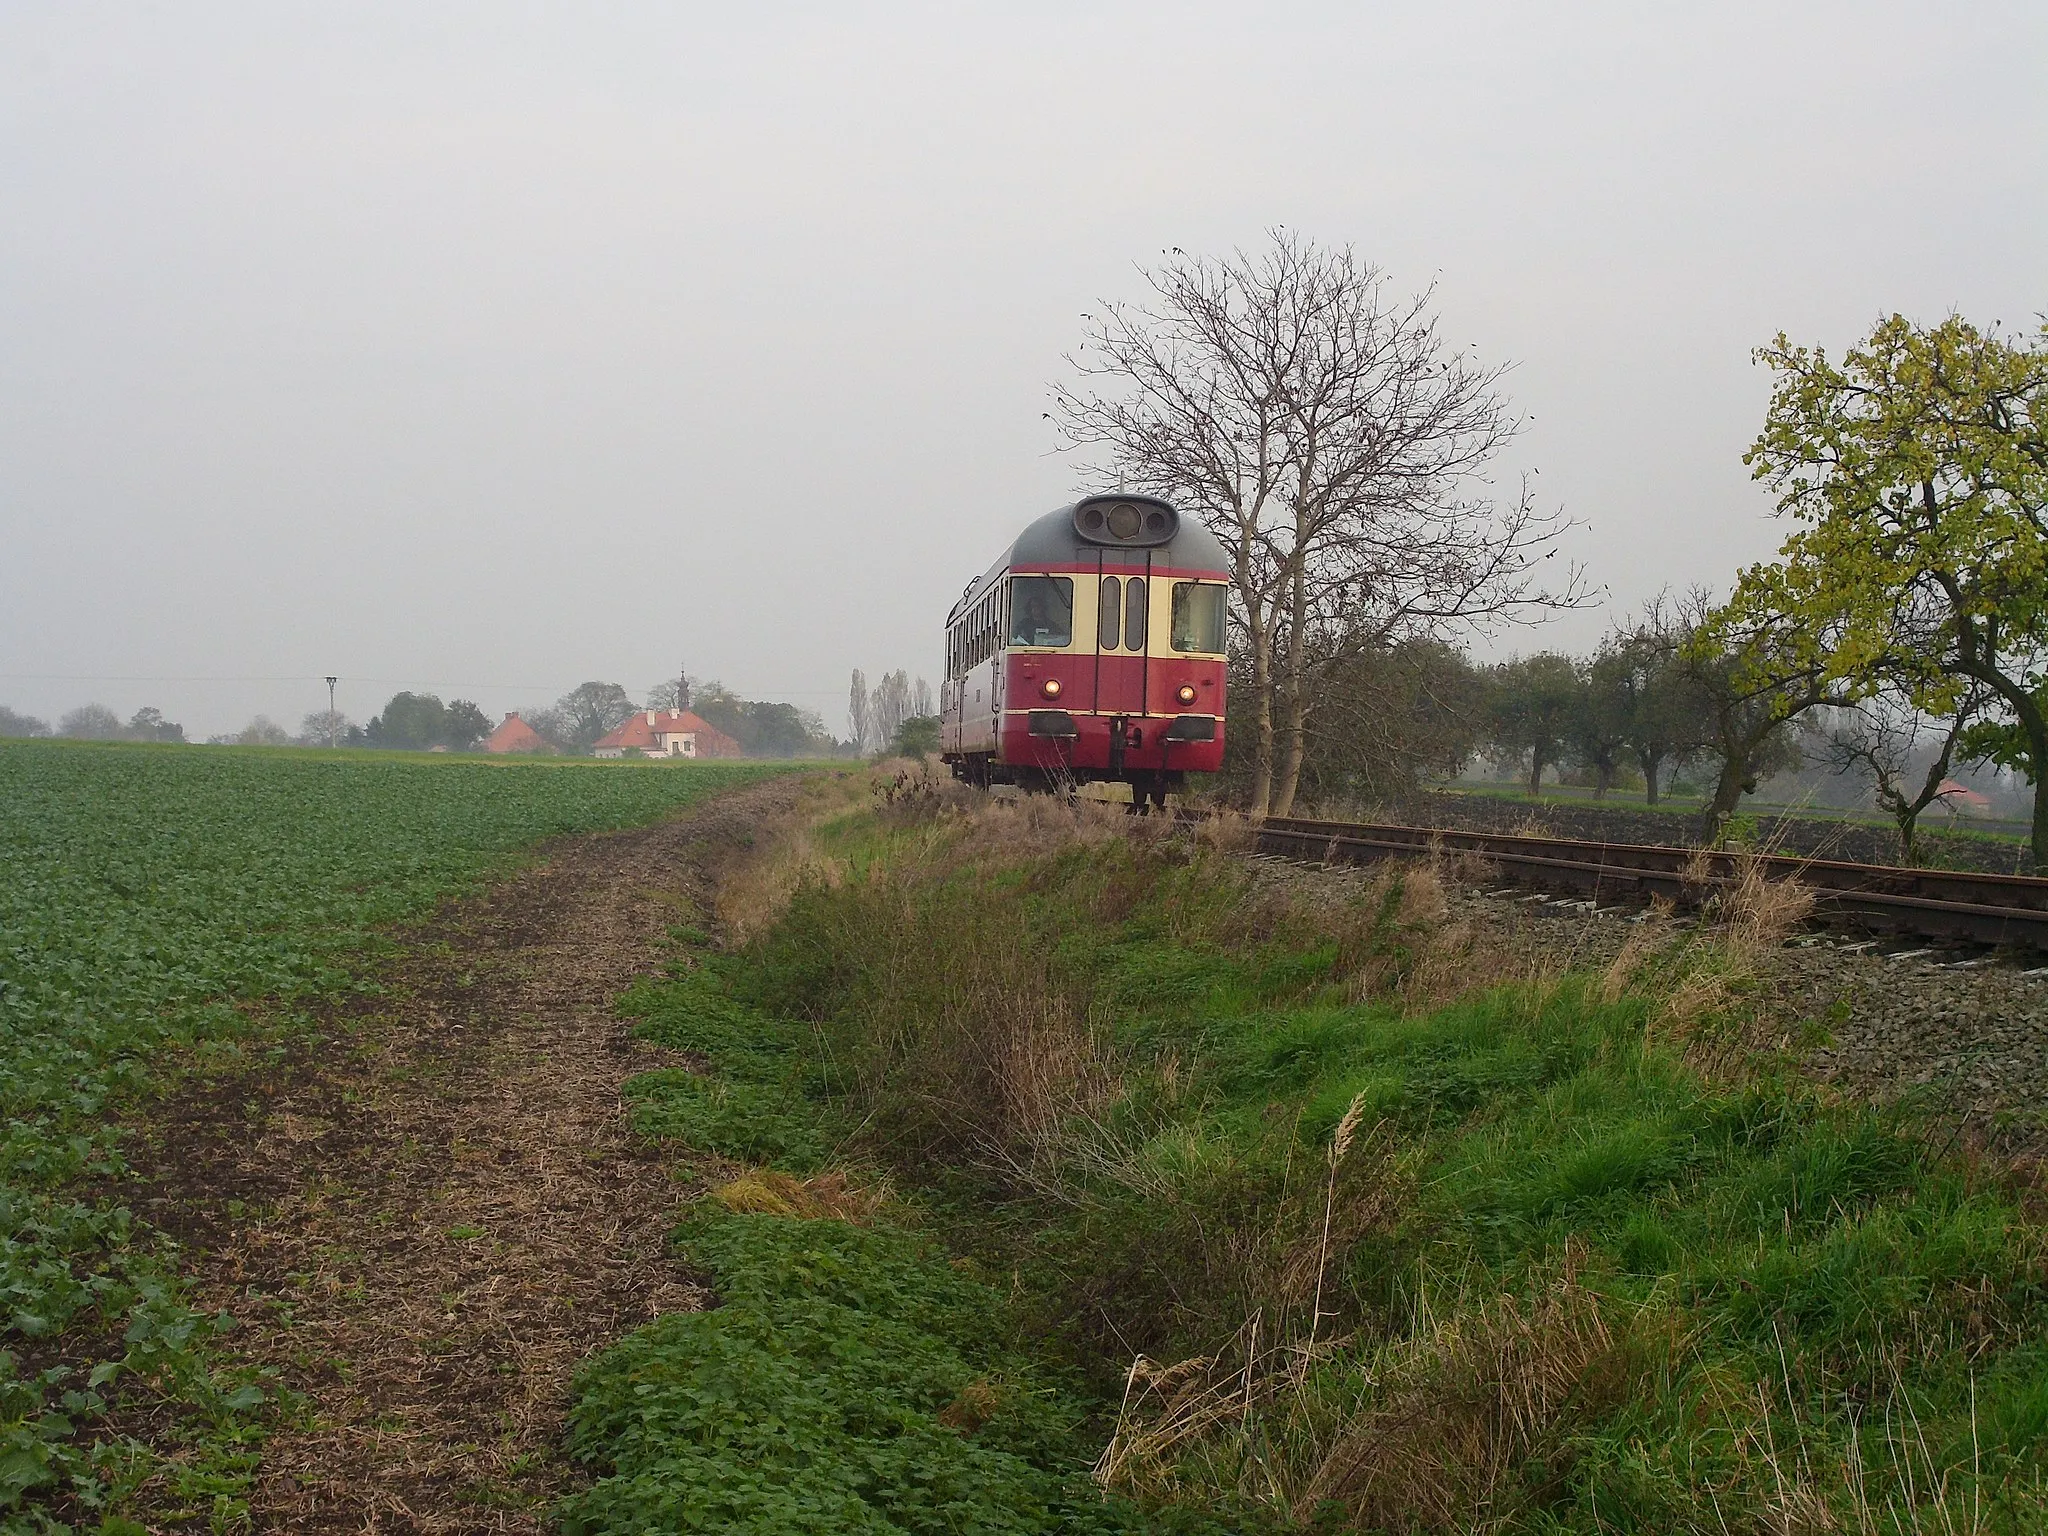 Photo showing: Railcar M286.1008 of KŽC Doprava on the way from Dlažkovice (village in the background) towards Podsedice, on a route from Čížkovice to Obrnice.